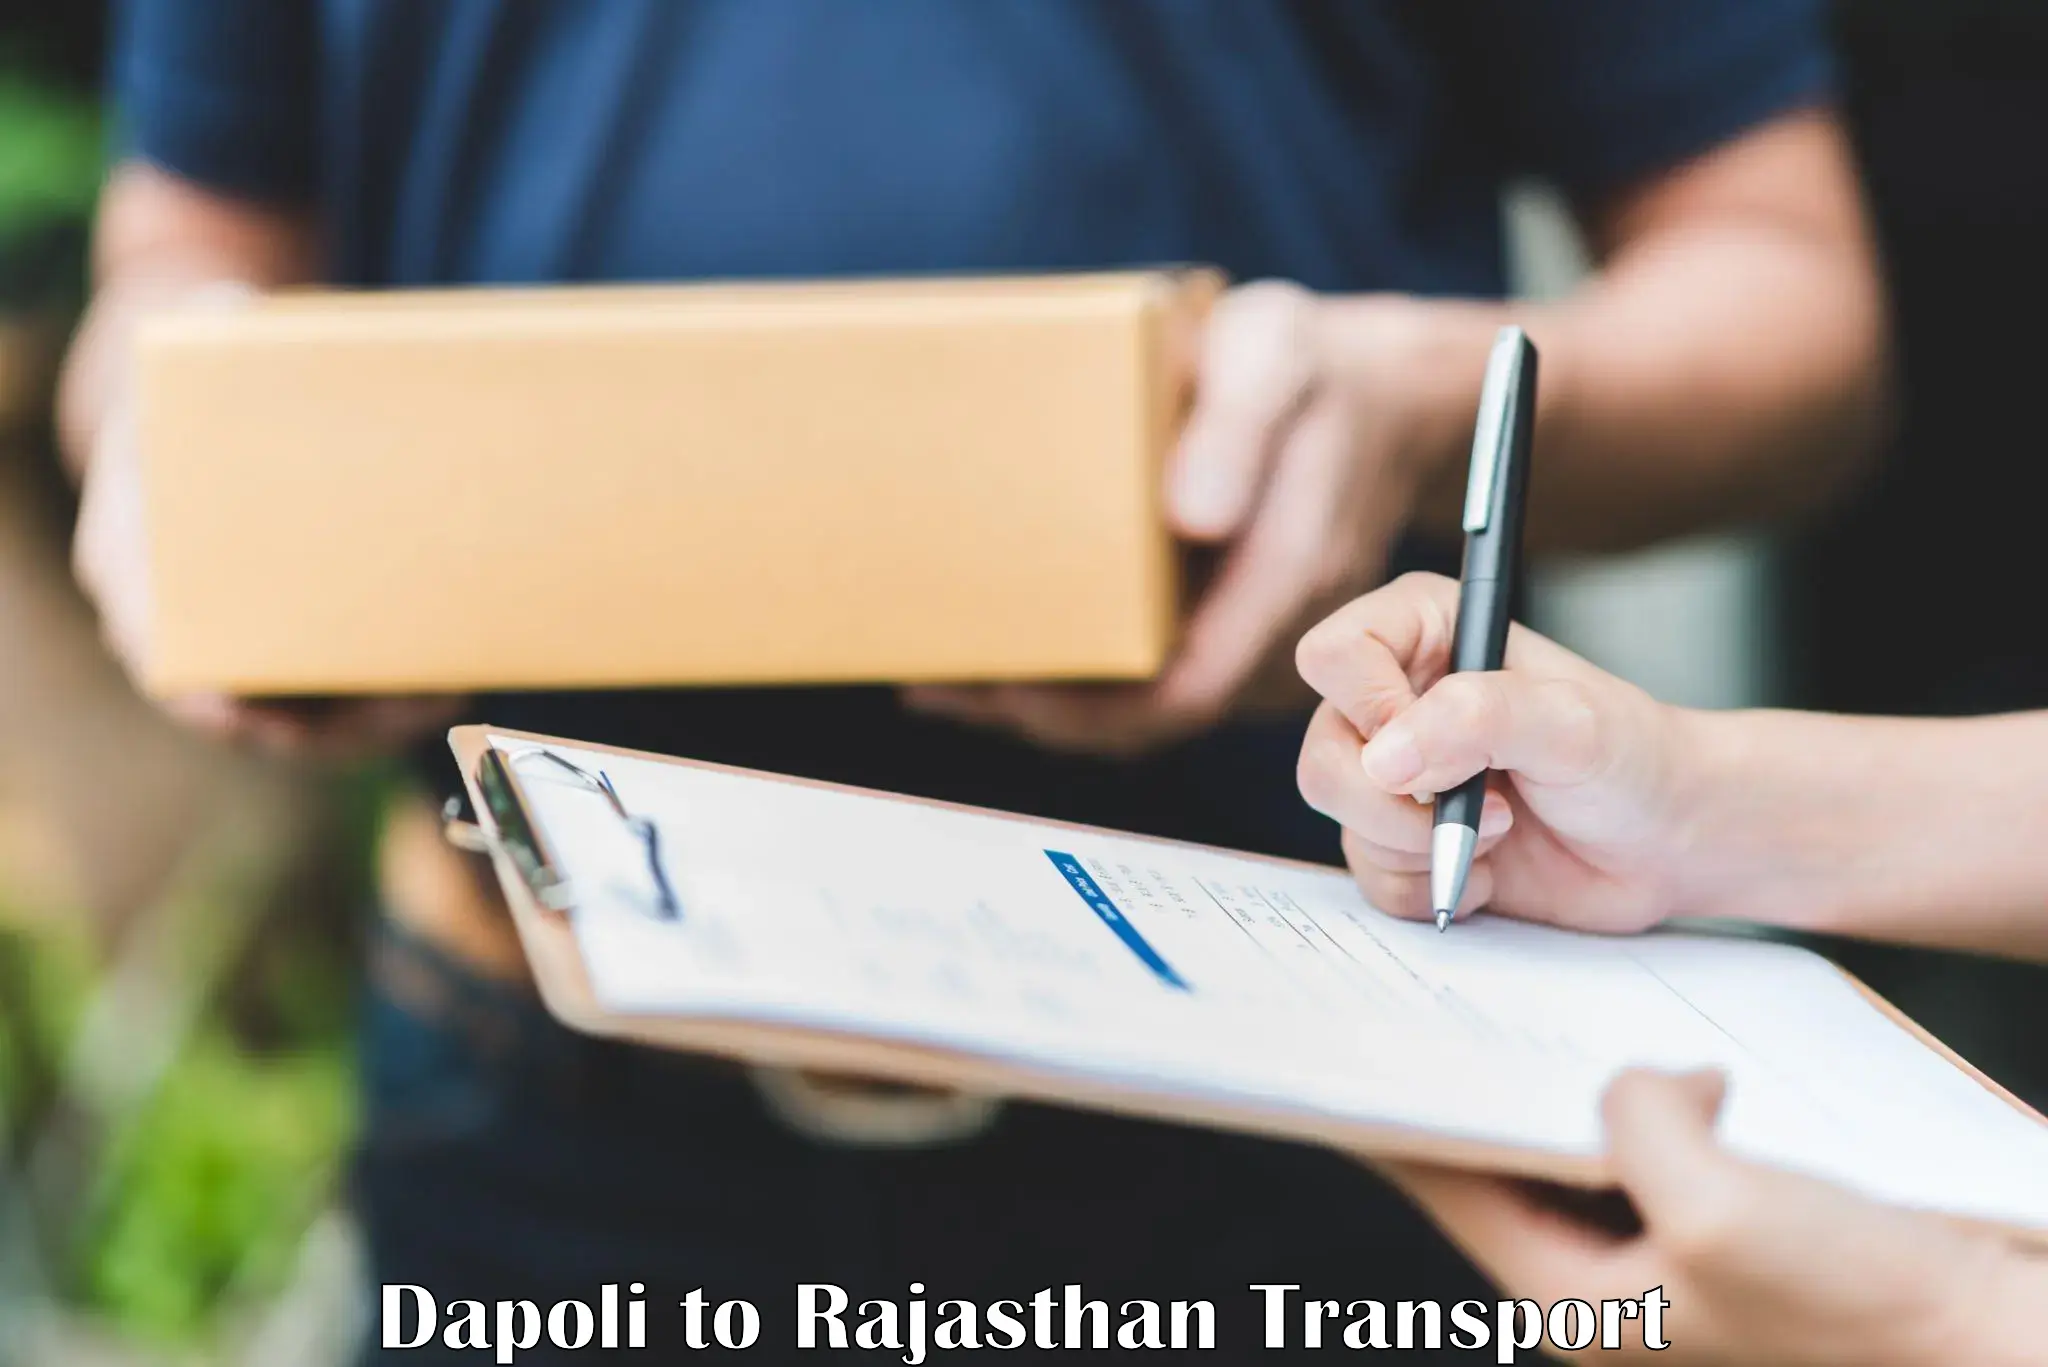 Container transport service Dapoli to Dholpur